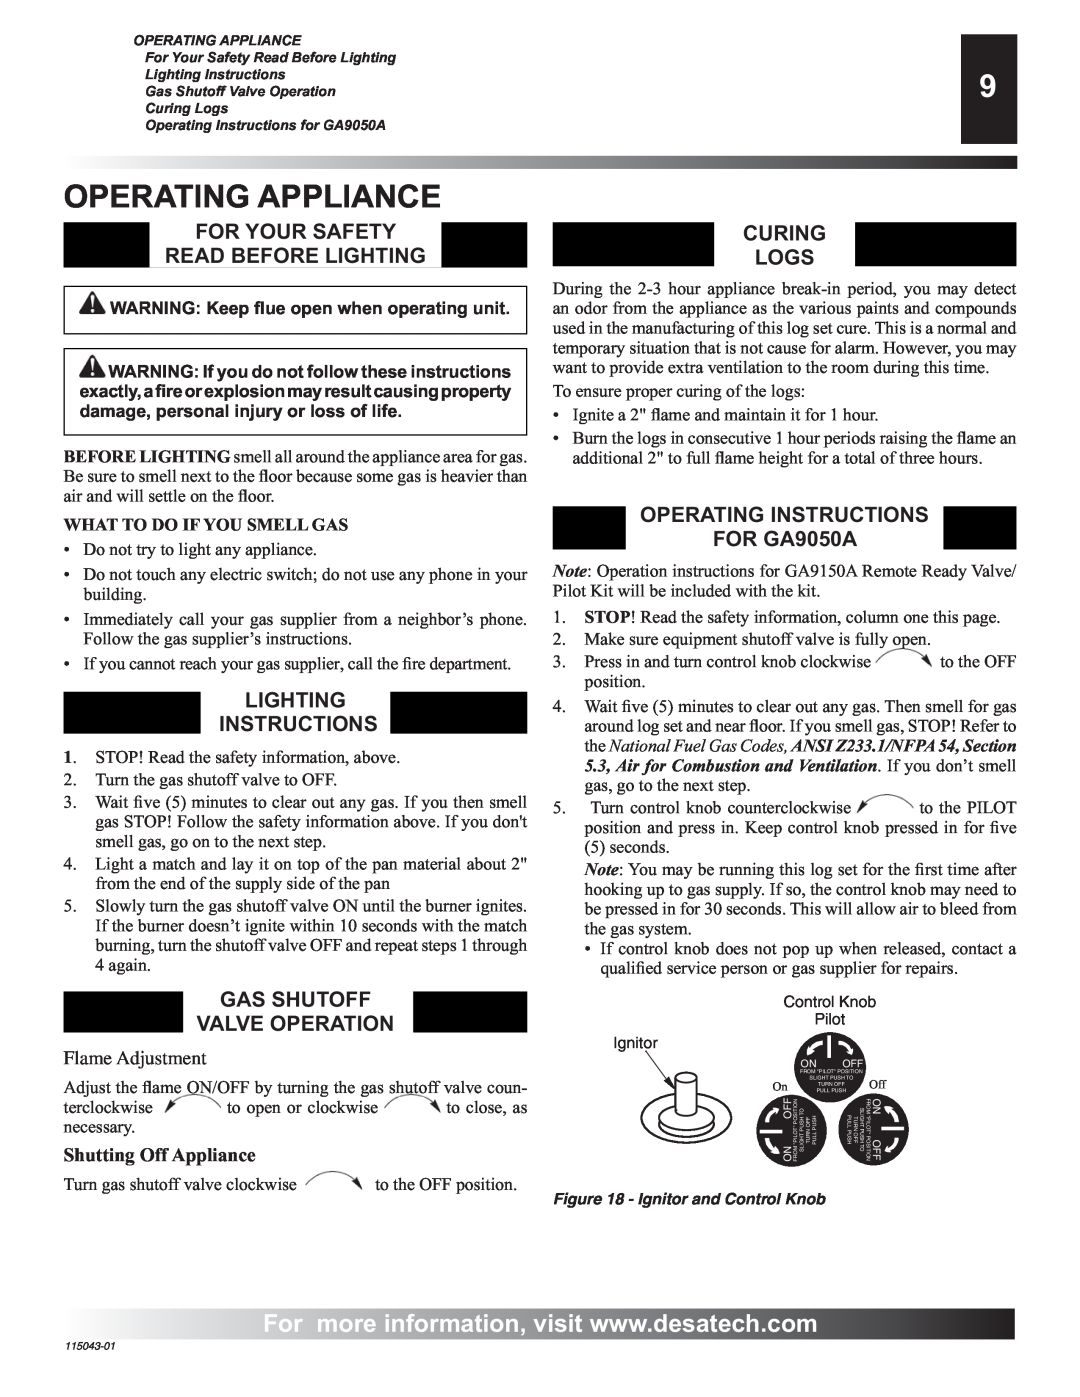 Desa RGA 2-72 Operating Appliance, Flame Adjustment, Shutting Off Appliance, WARNING Keep ﬂue open when operating unit 